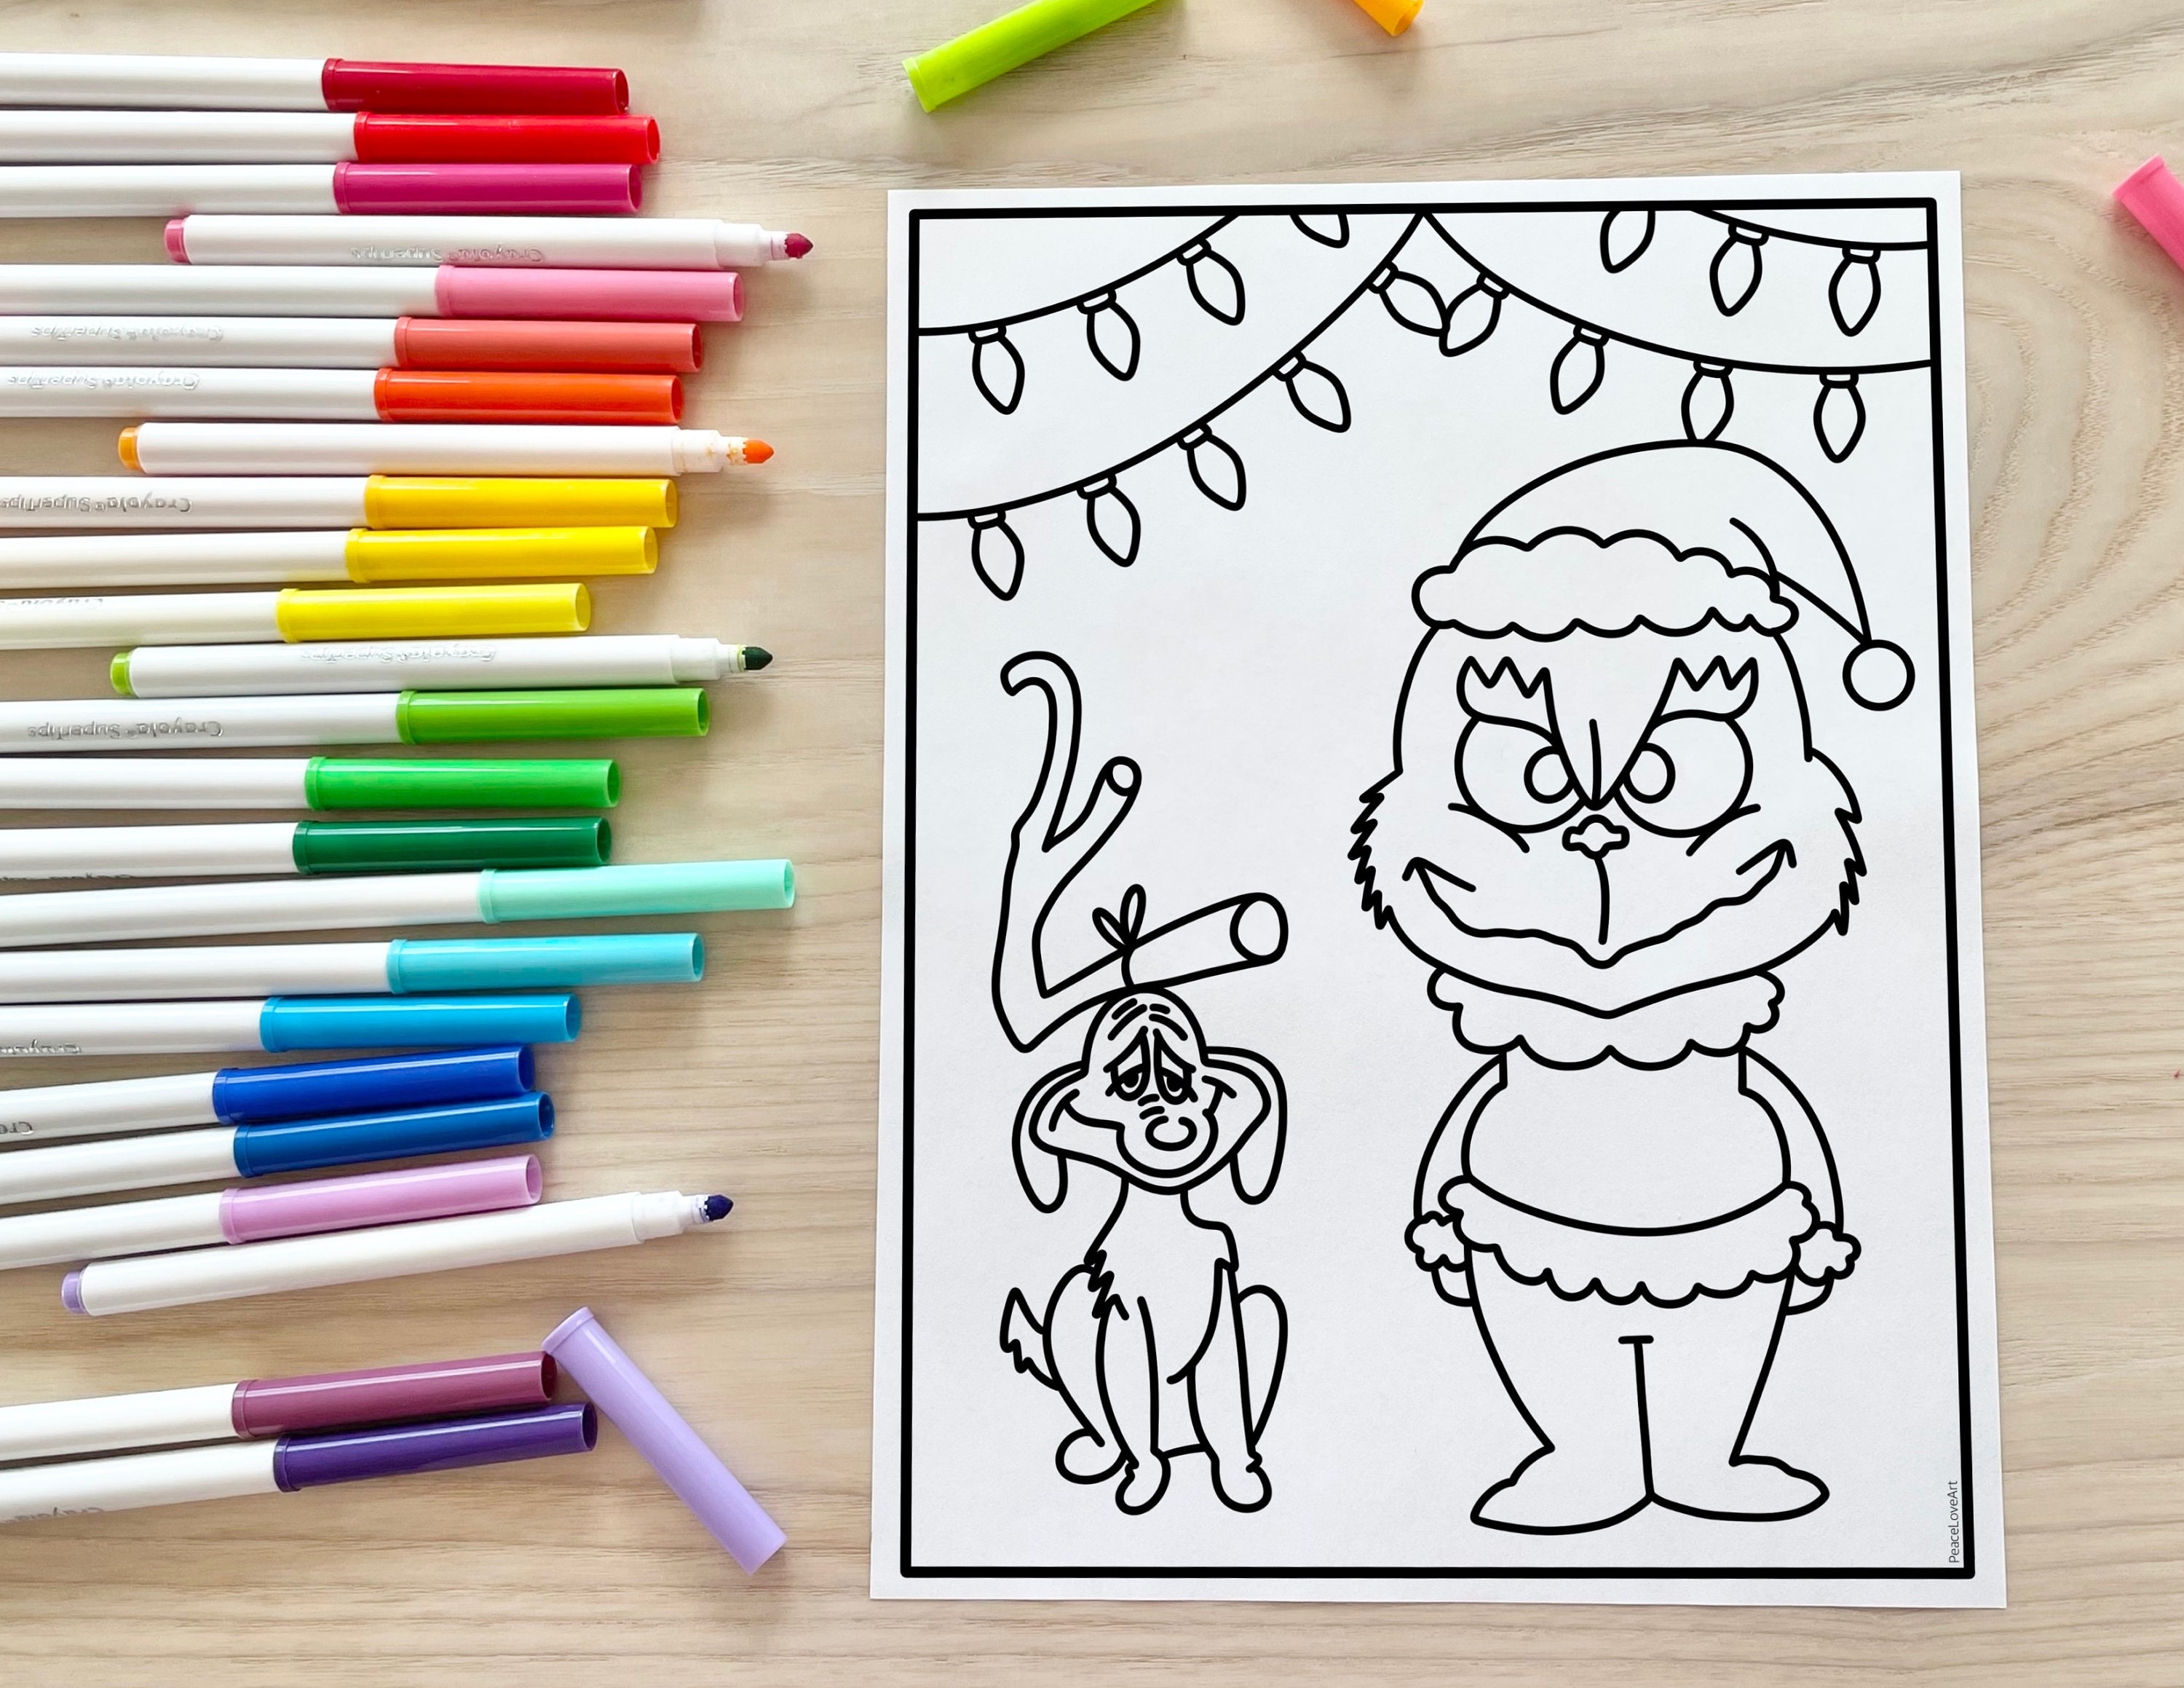 christmas coloring pages grinch